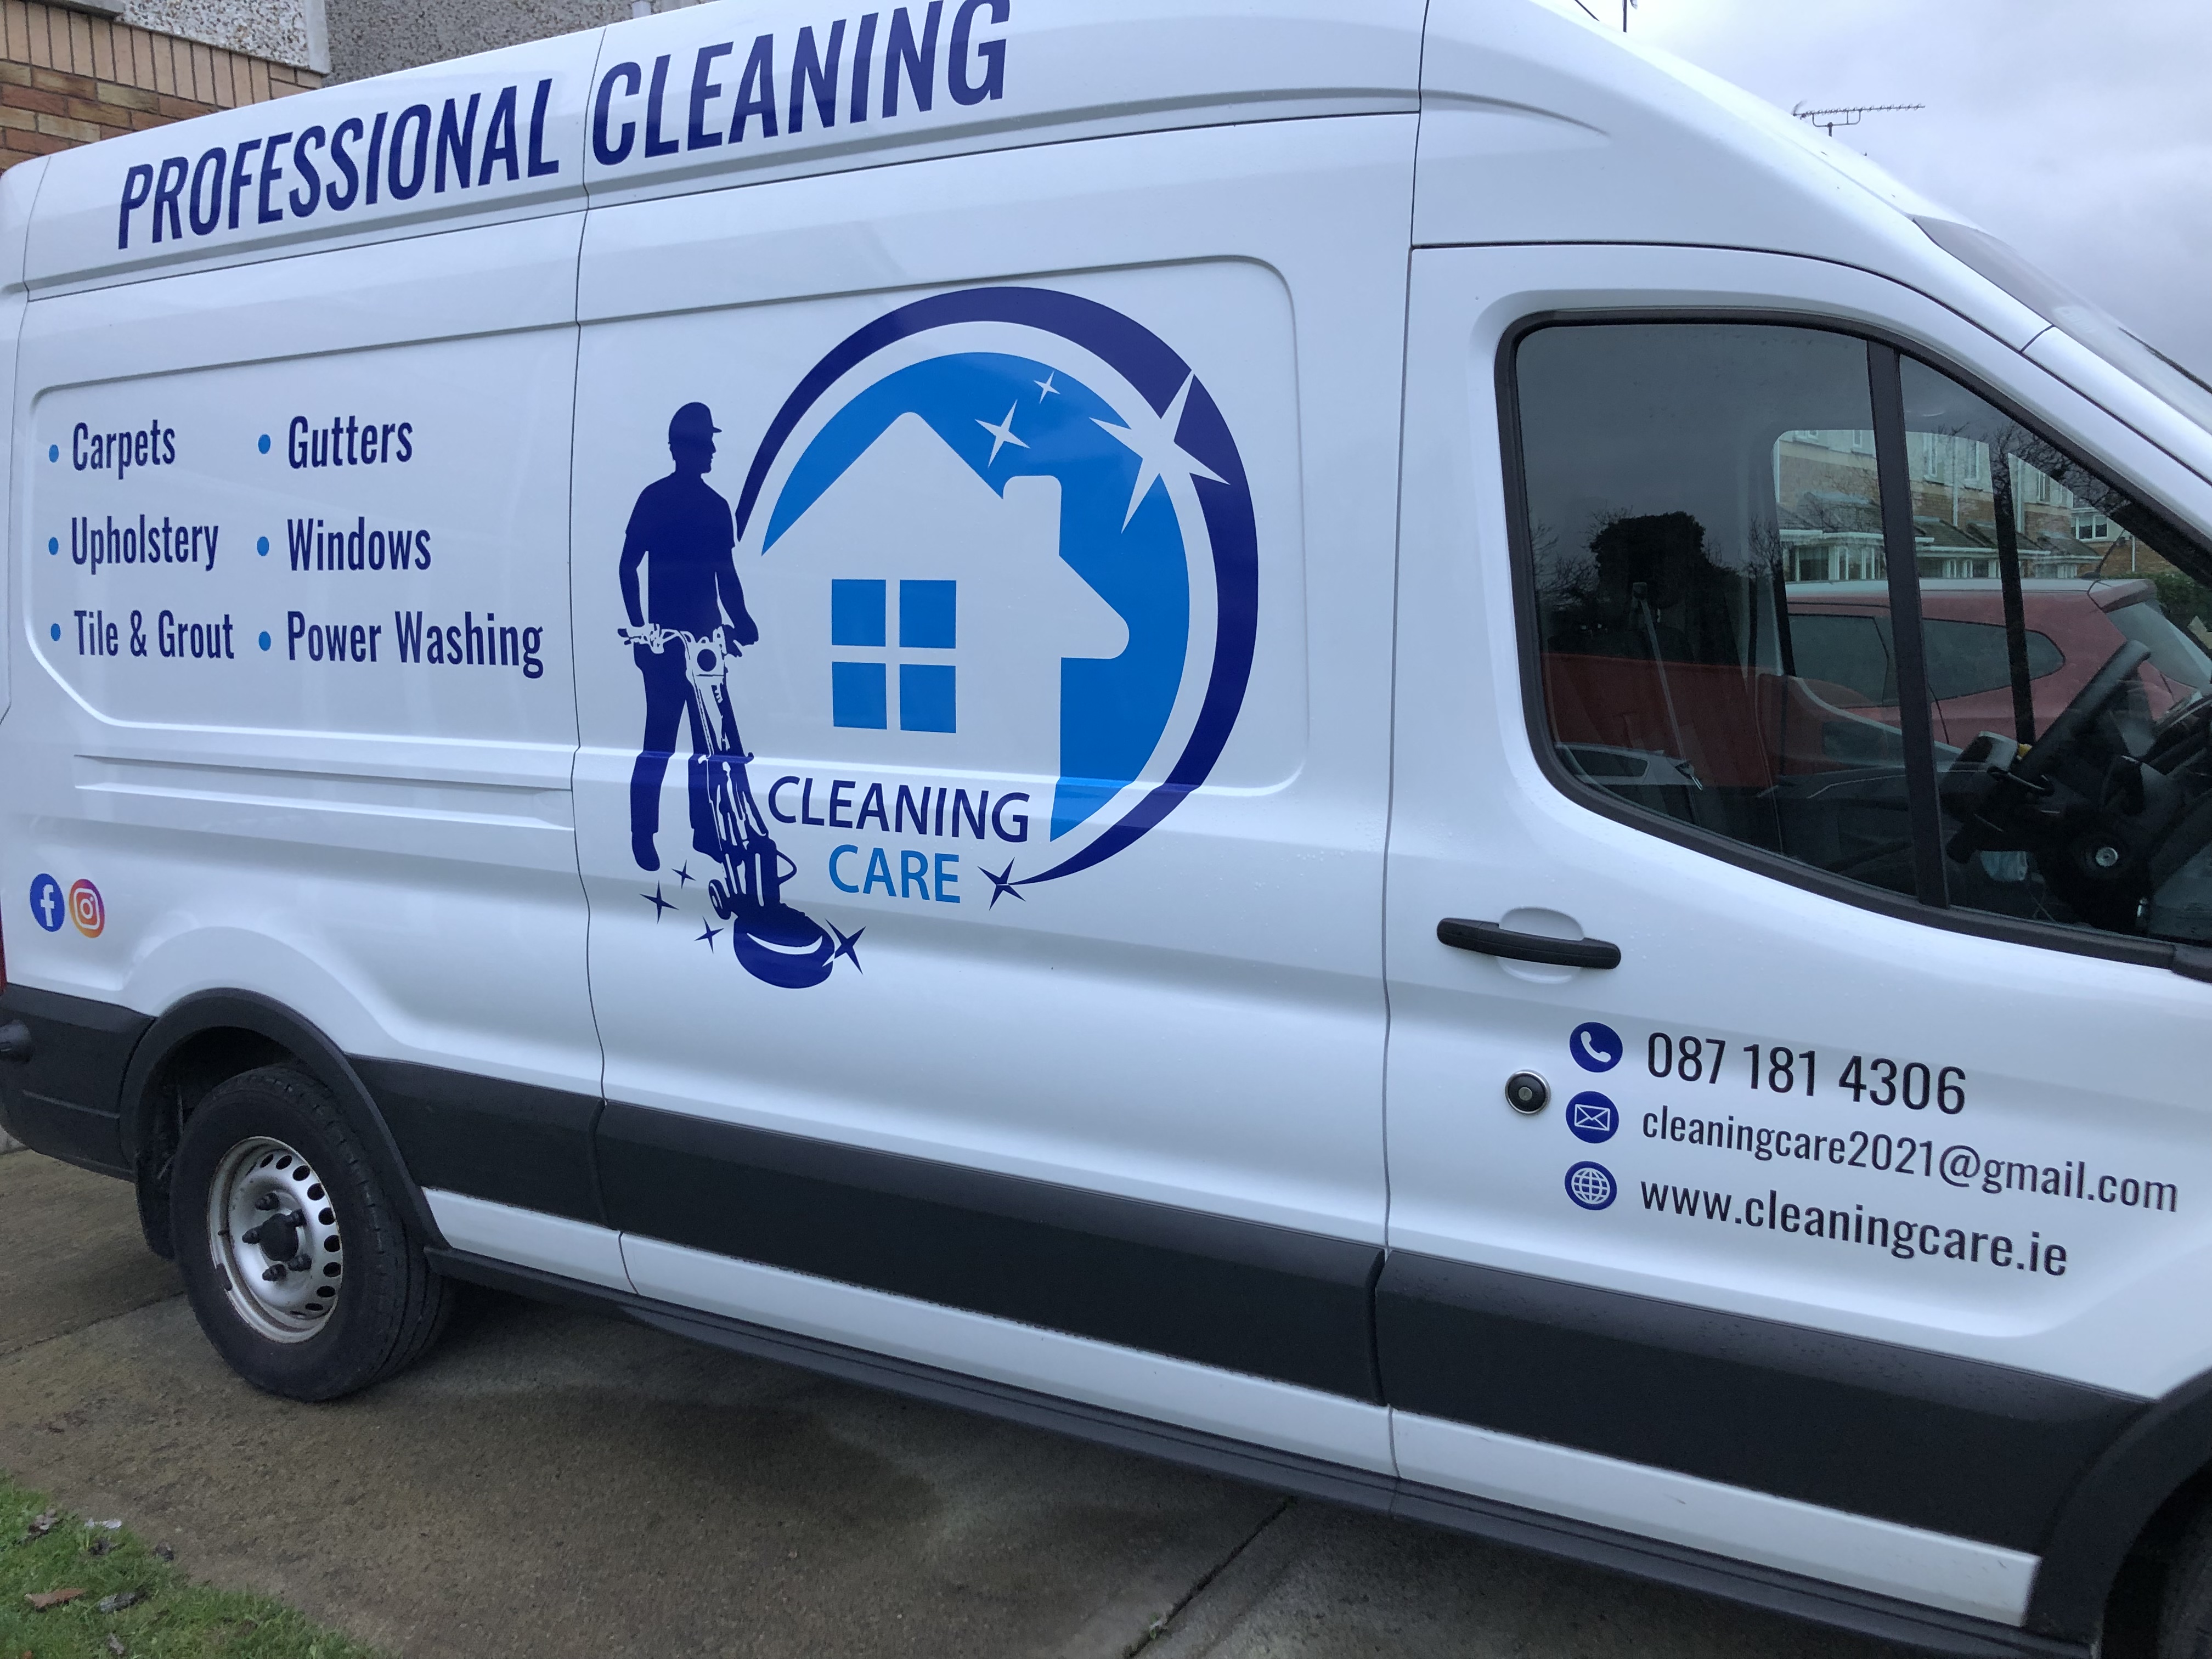 Cleaning Care 